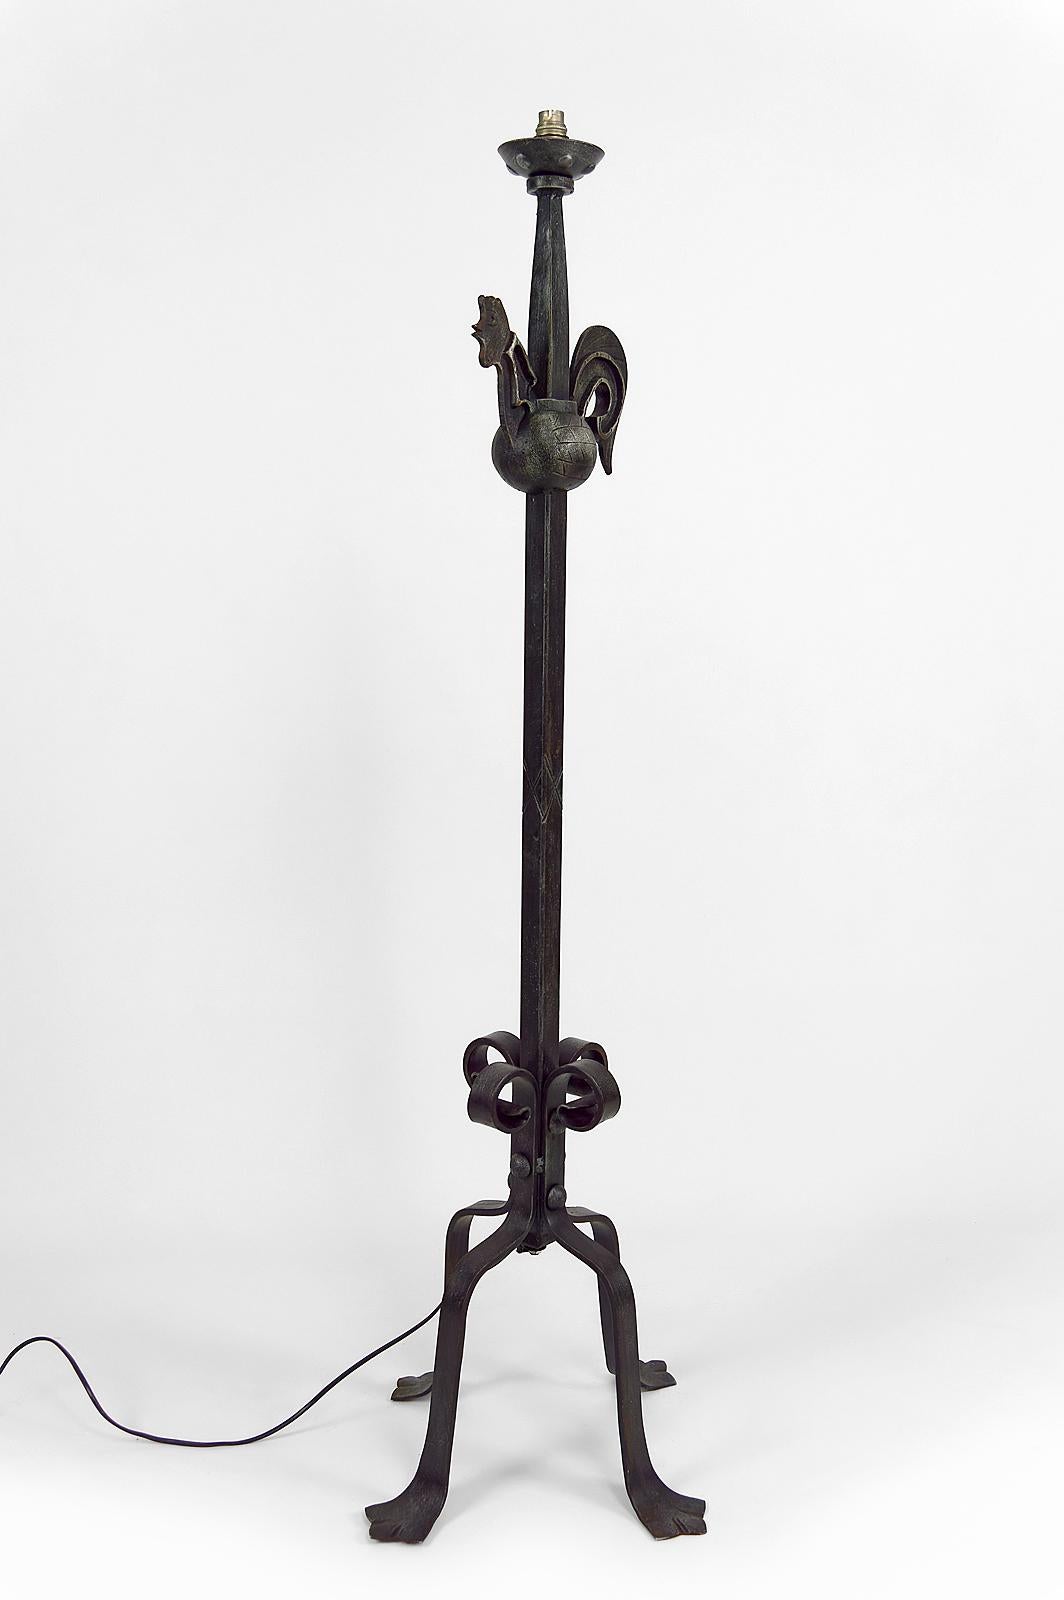 French Rooster Floor Lamp in Wrought Iron by Jean Touret for Ateliers Marolles, 1950's For Sale